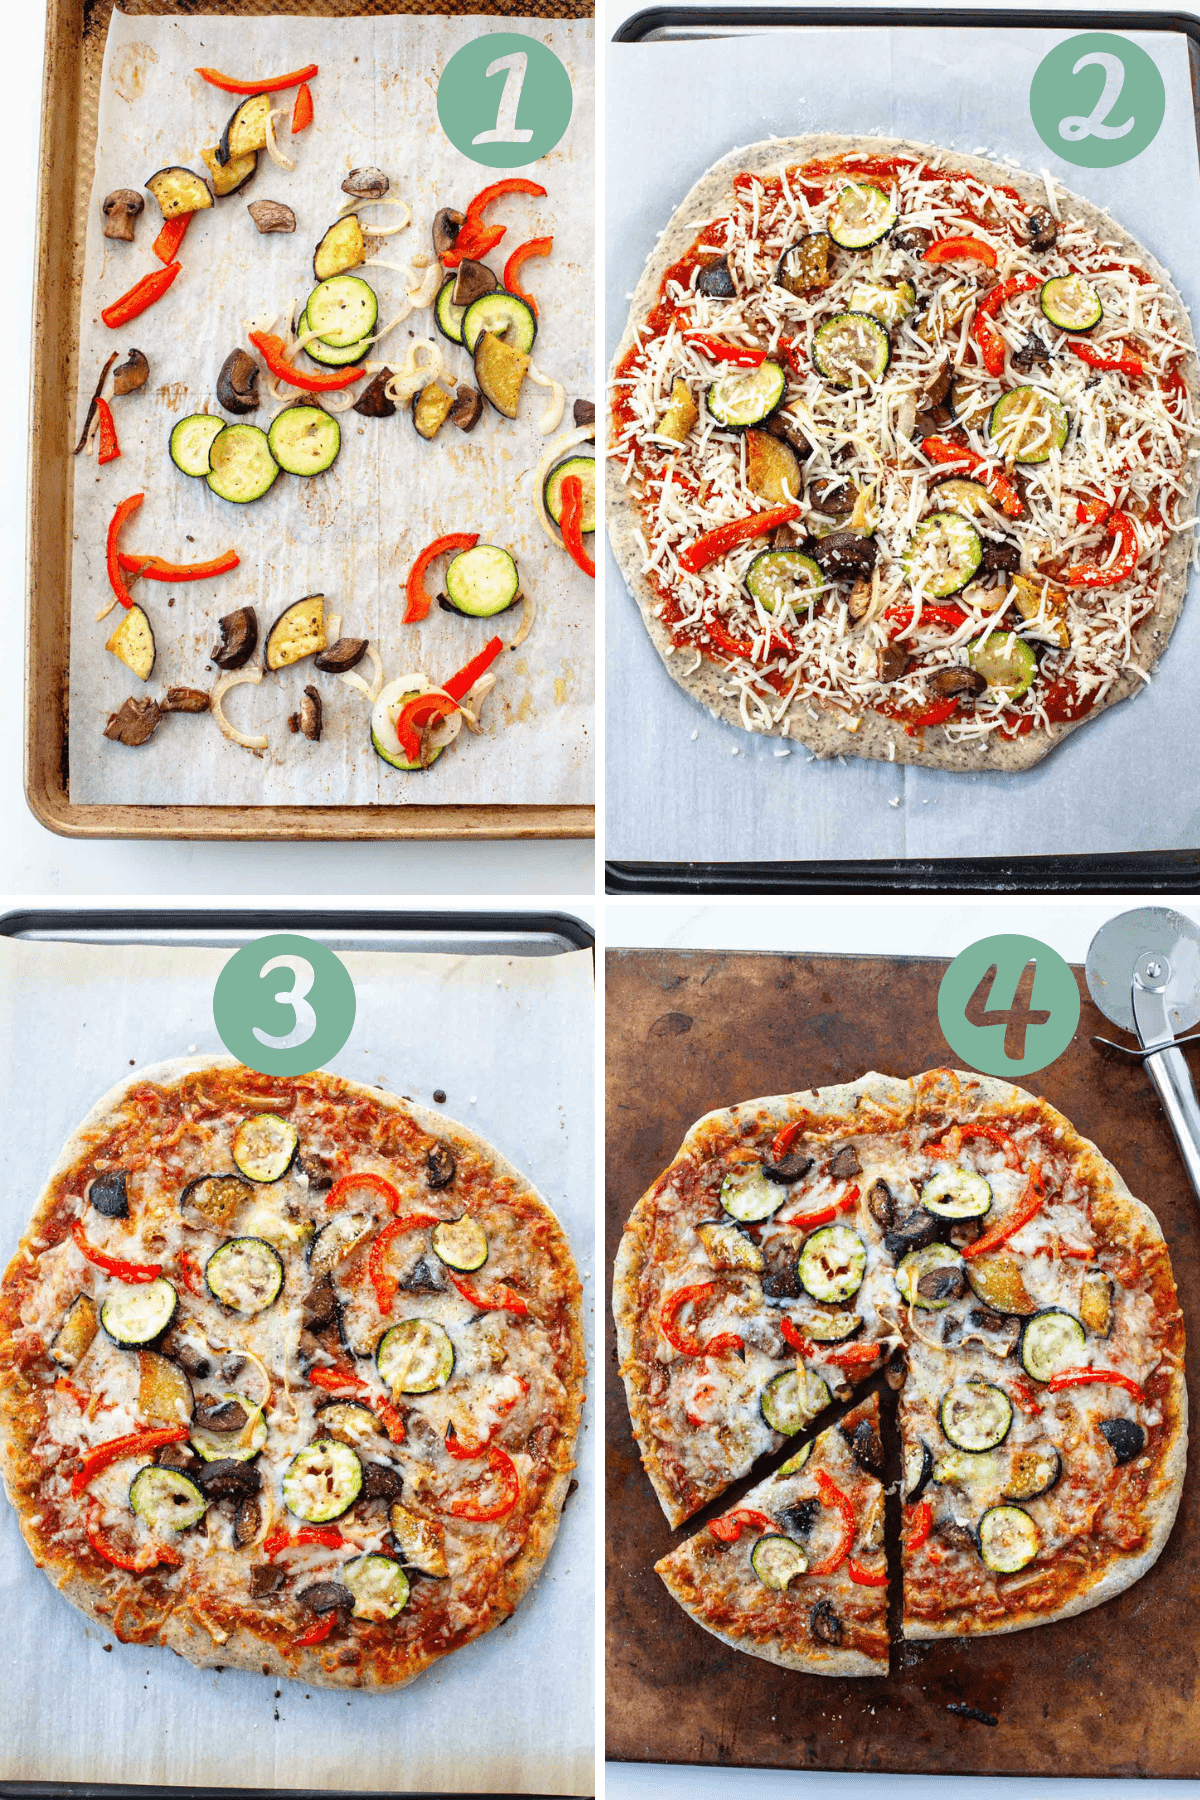 roasted vegetable pizza step by step instructions